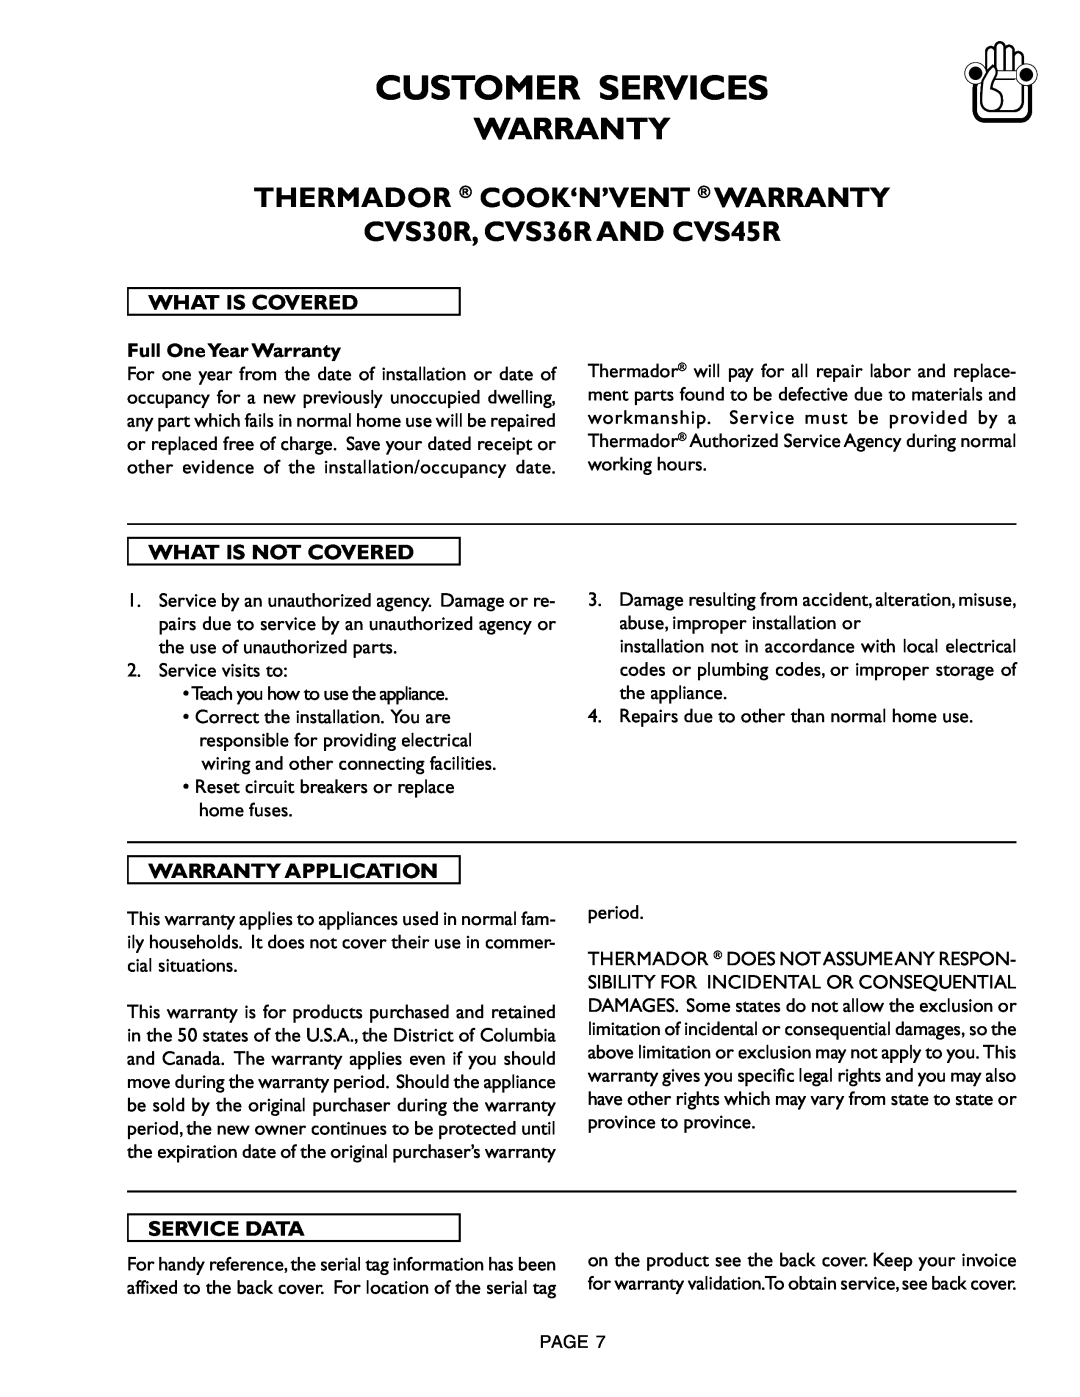 Thermador CVS30R 36, CVS36R 45 Customer Services, What Is Covered, What Is Not Covered, Warranty Application, Service Data 